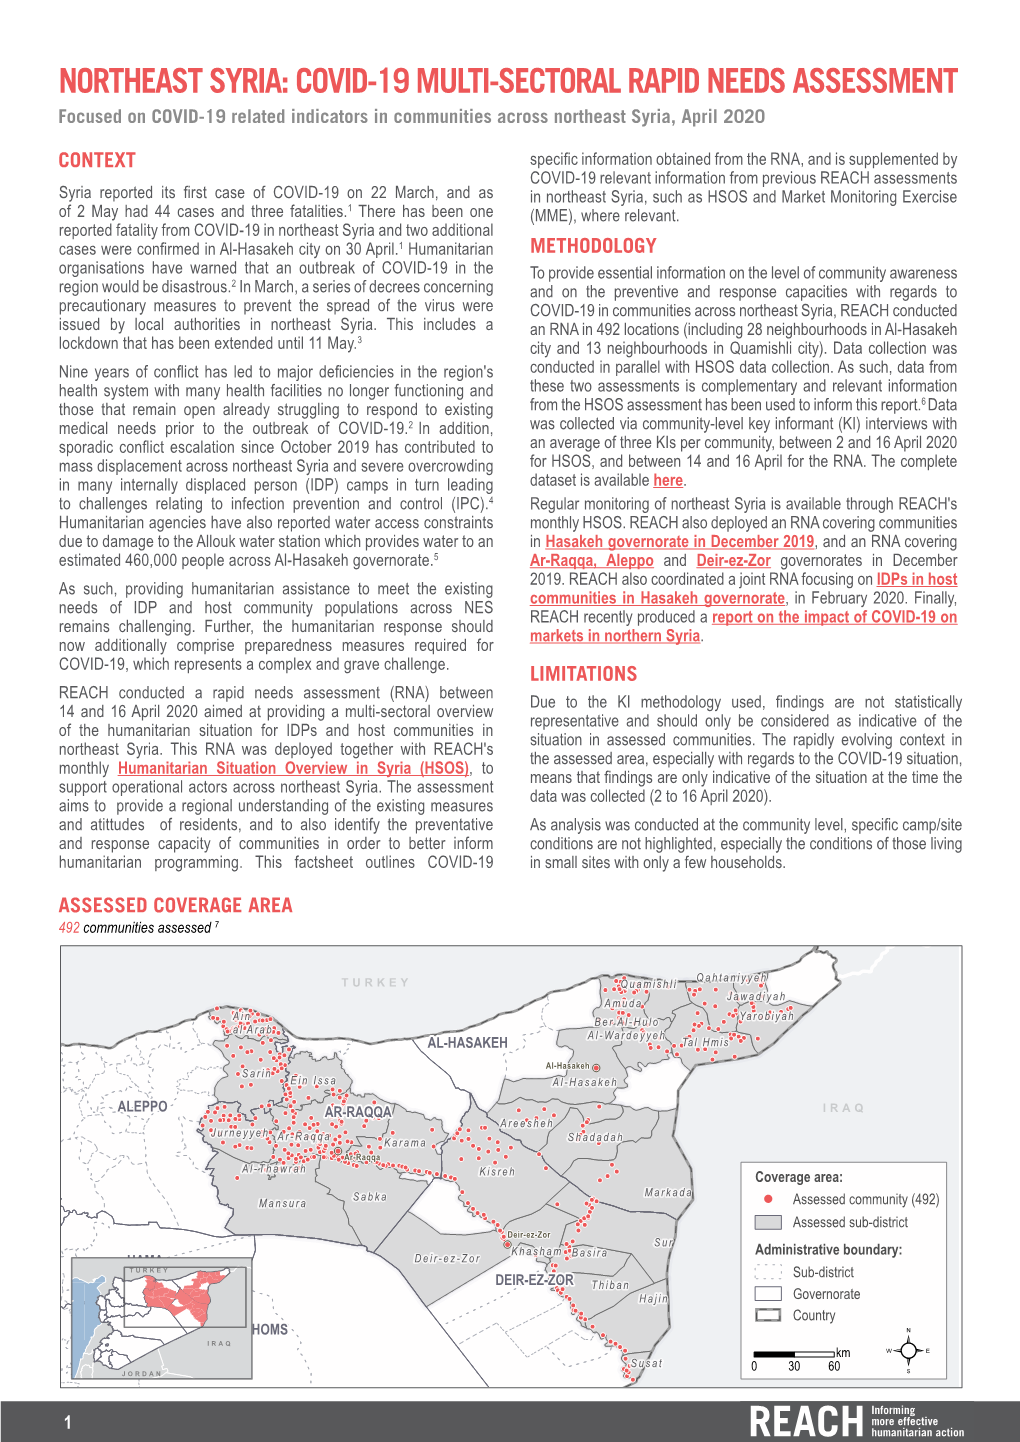 COVID-19 MULTI-SECTORAL RAPID NEEDS ASSESSMENT Focused on COVID-19 Related Indicators in Communities Across Northeast Syria, April 2020